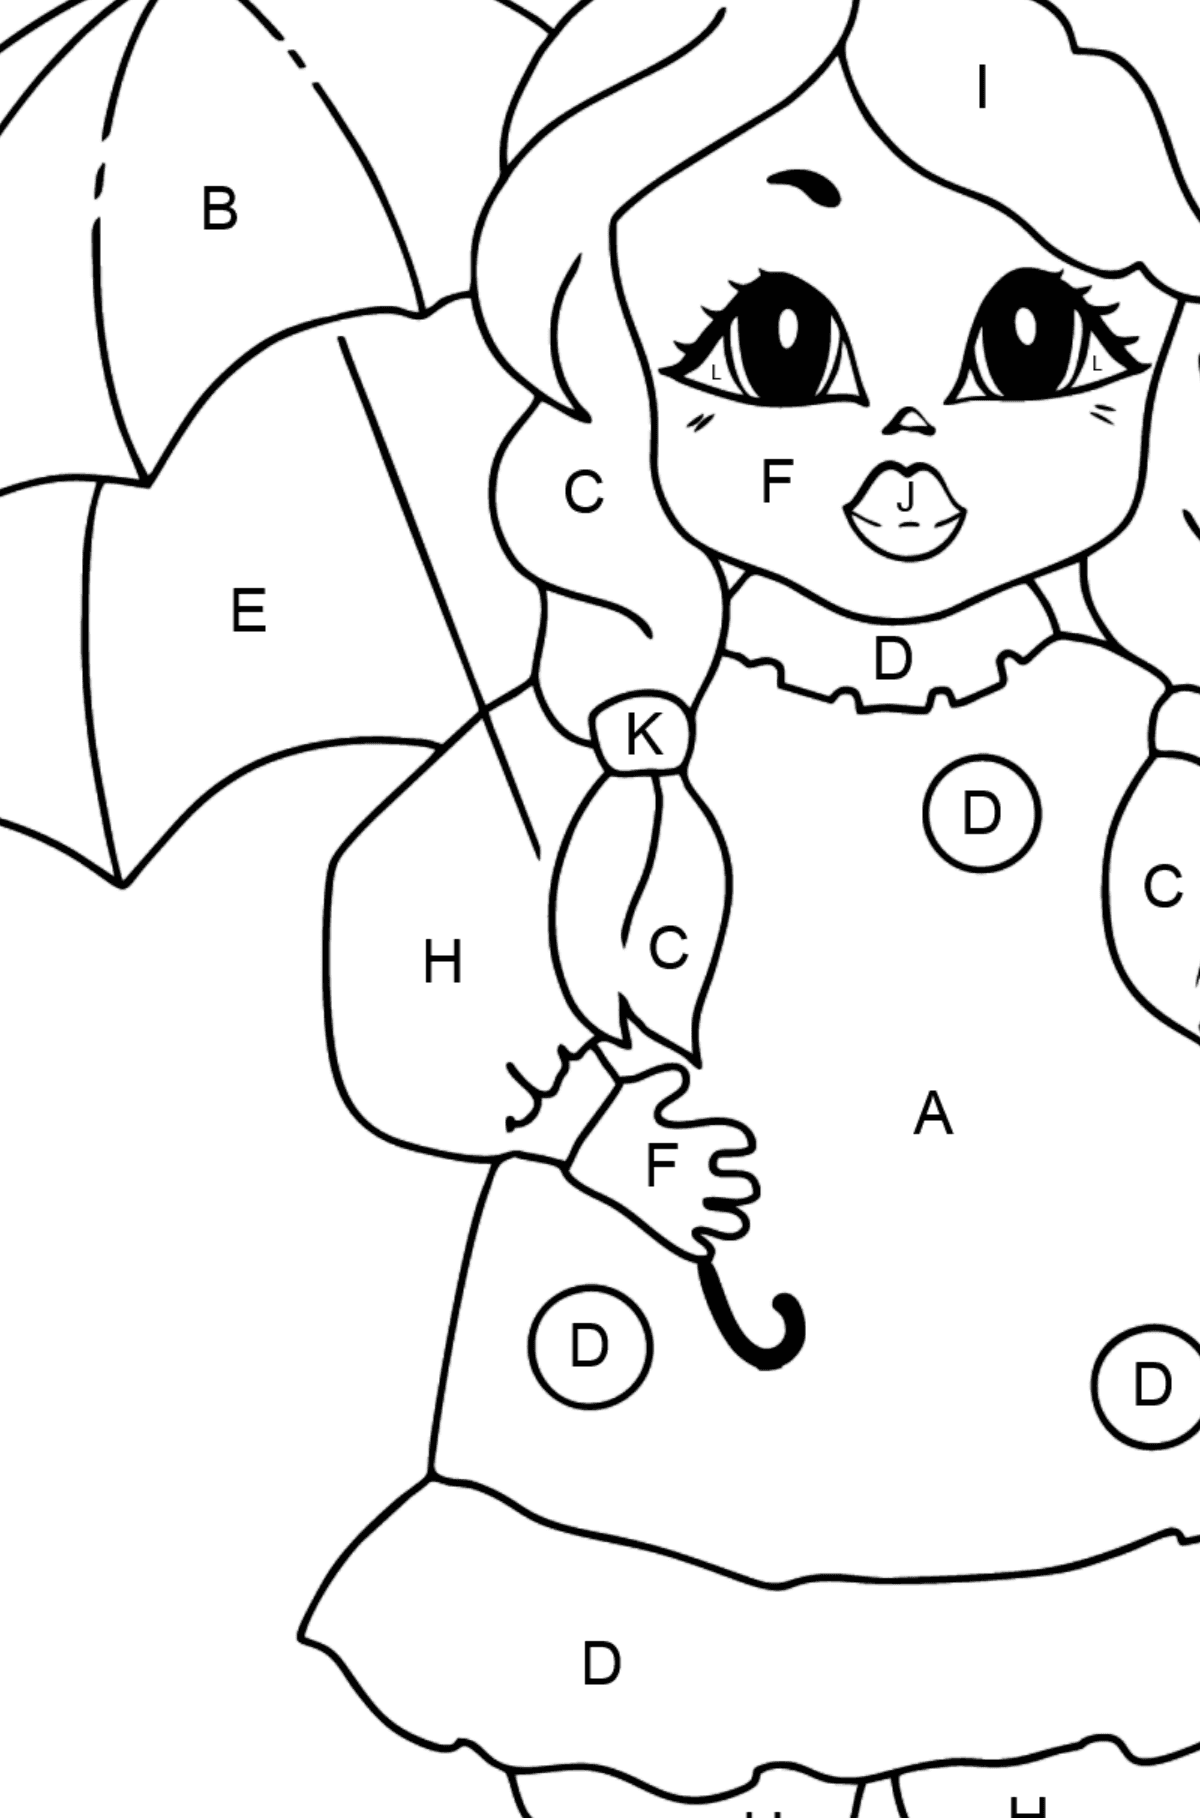 Funny princess coloring page - Coloring by Letters for Kids